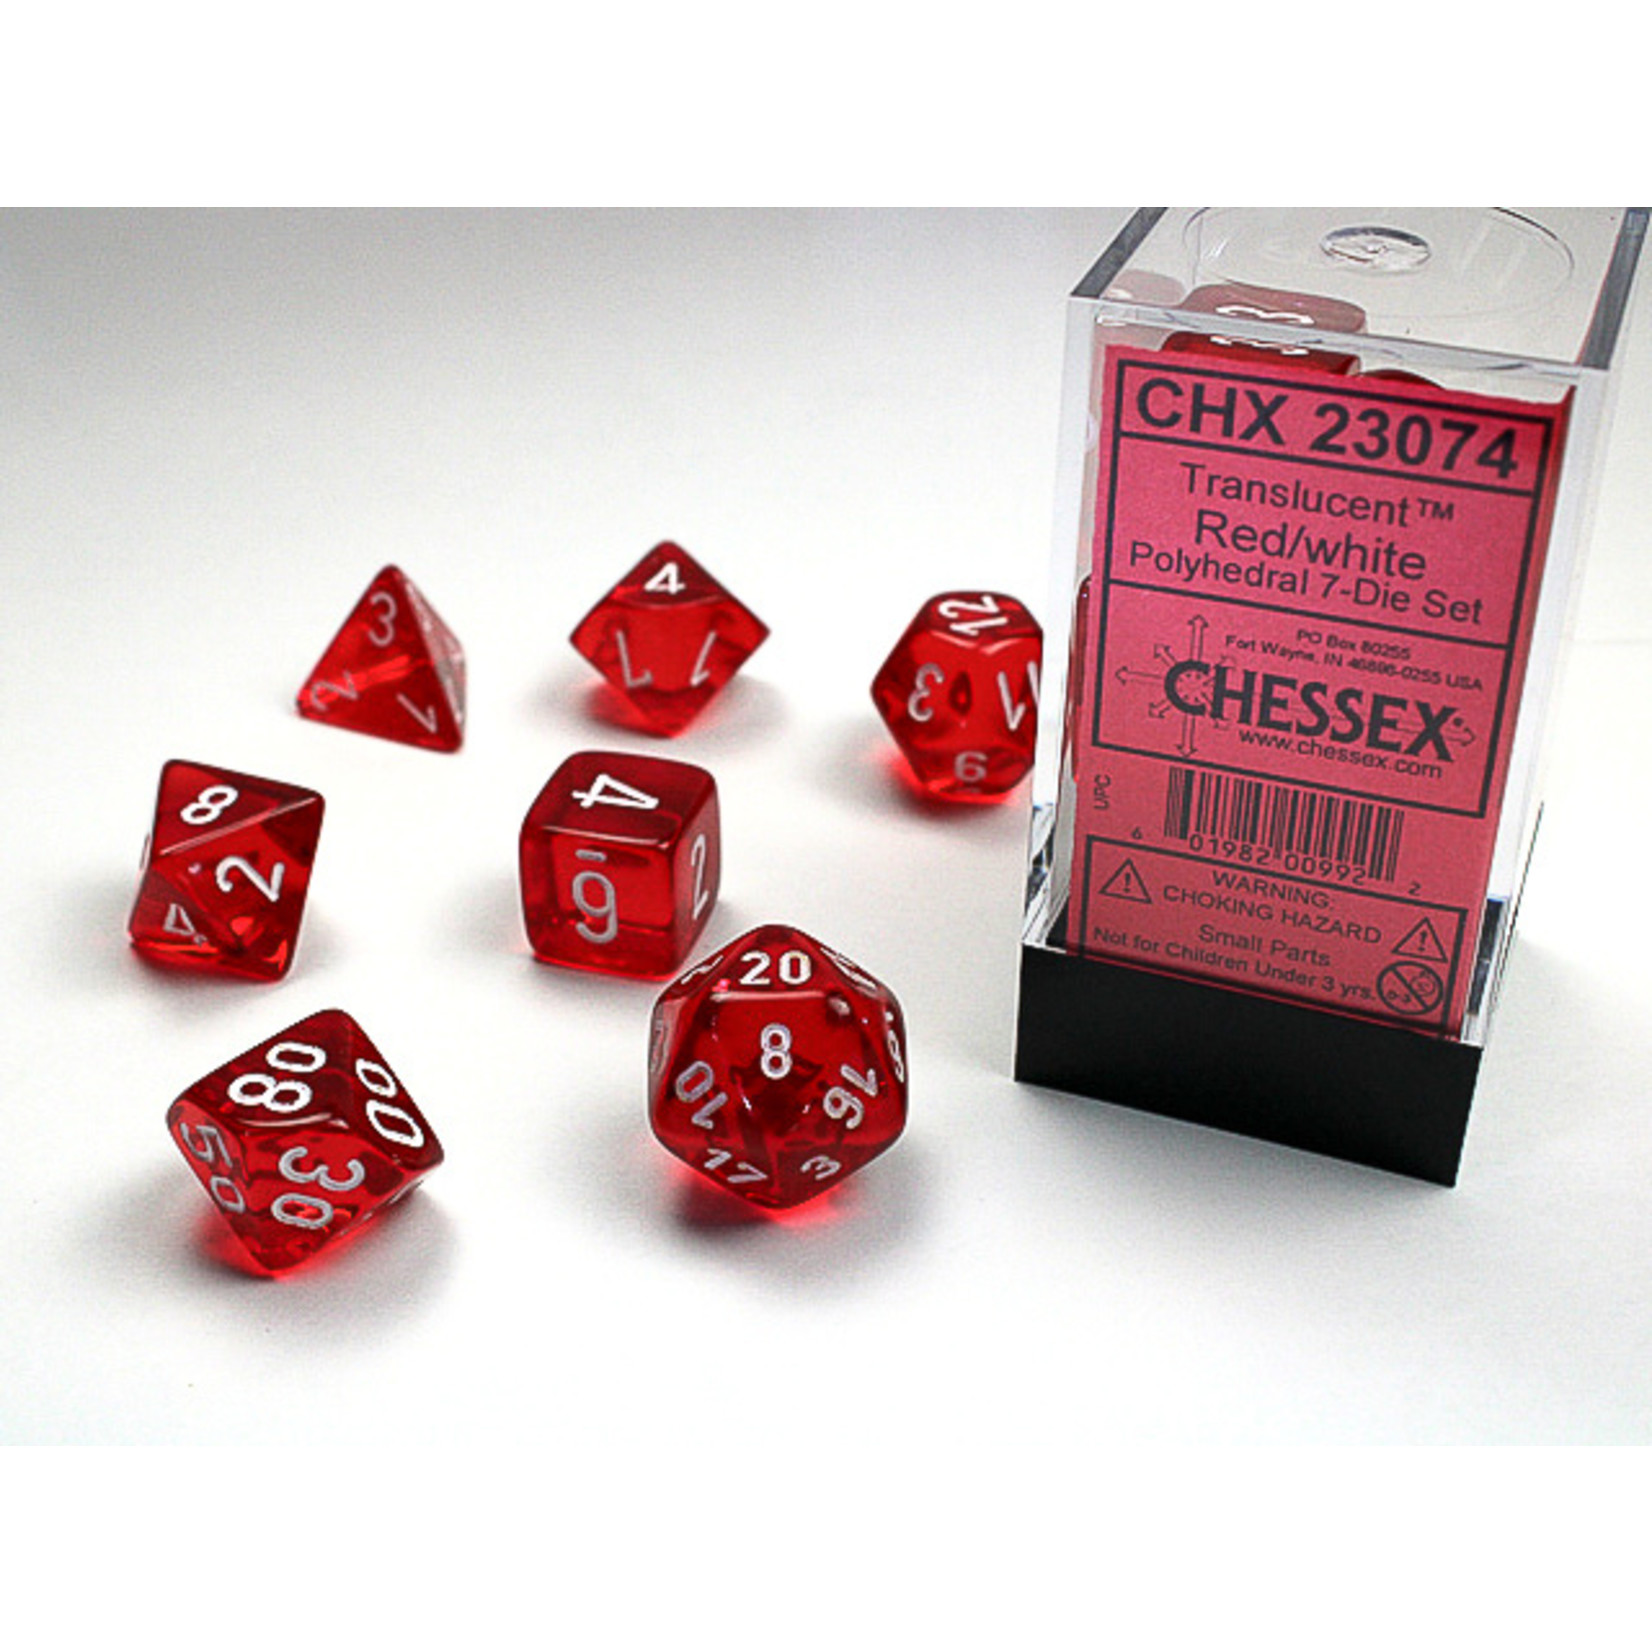 Chessex 23074 Translucent Red with White 7-Set